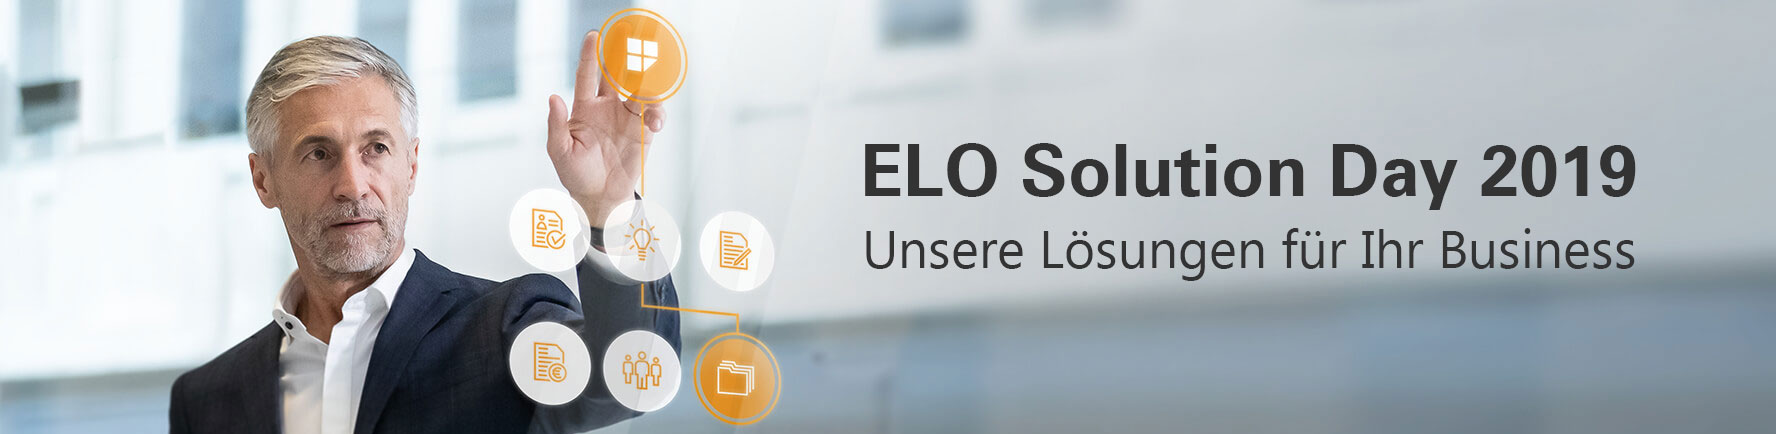 elo_solutionday_web